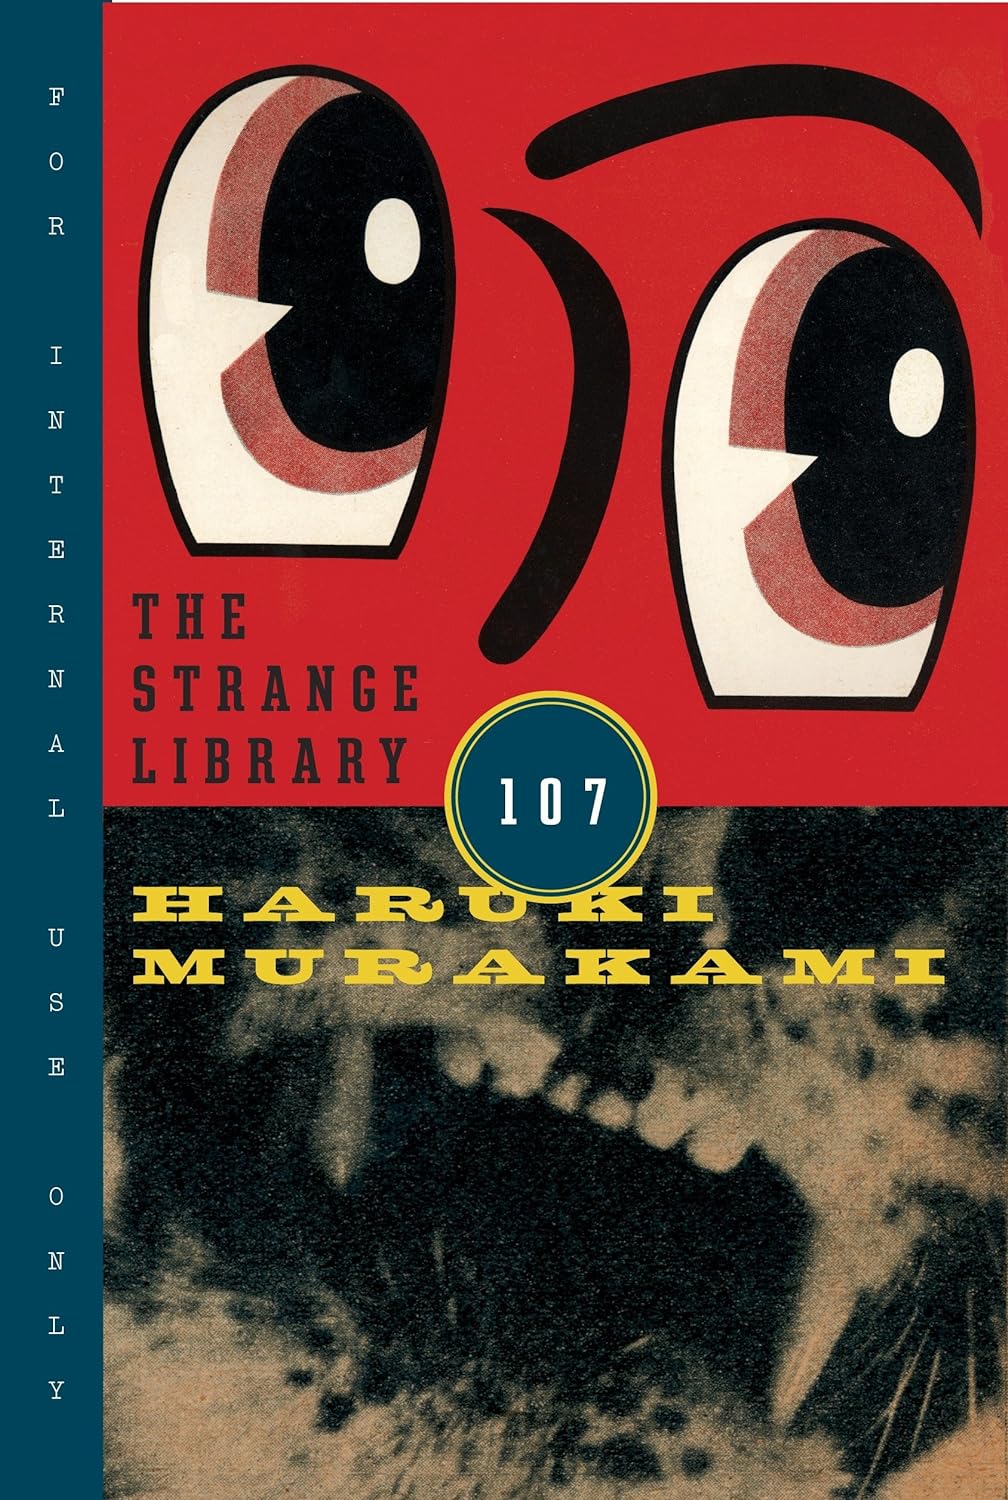 Books About Libraries2